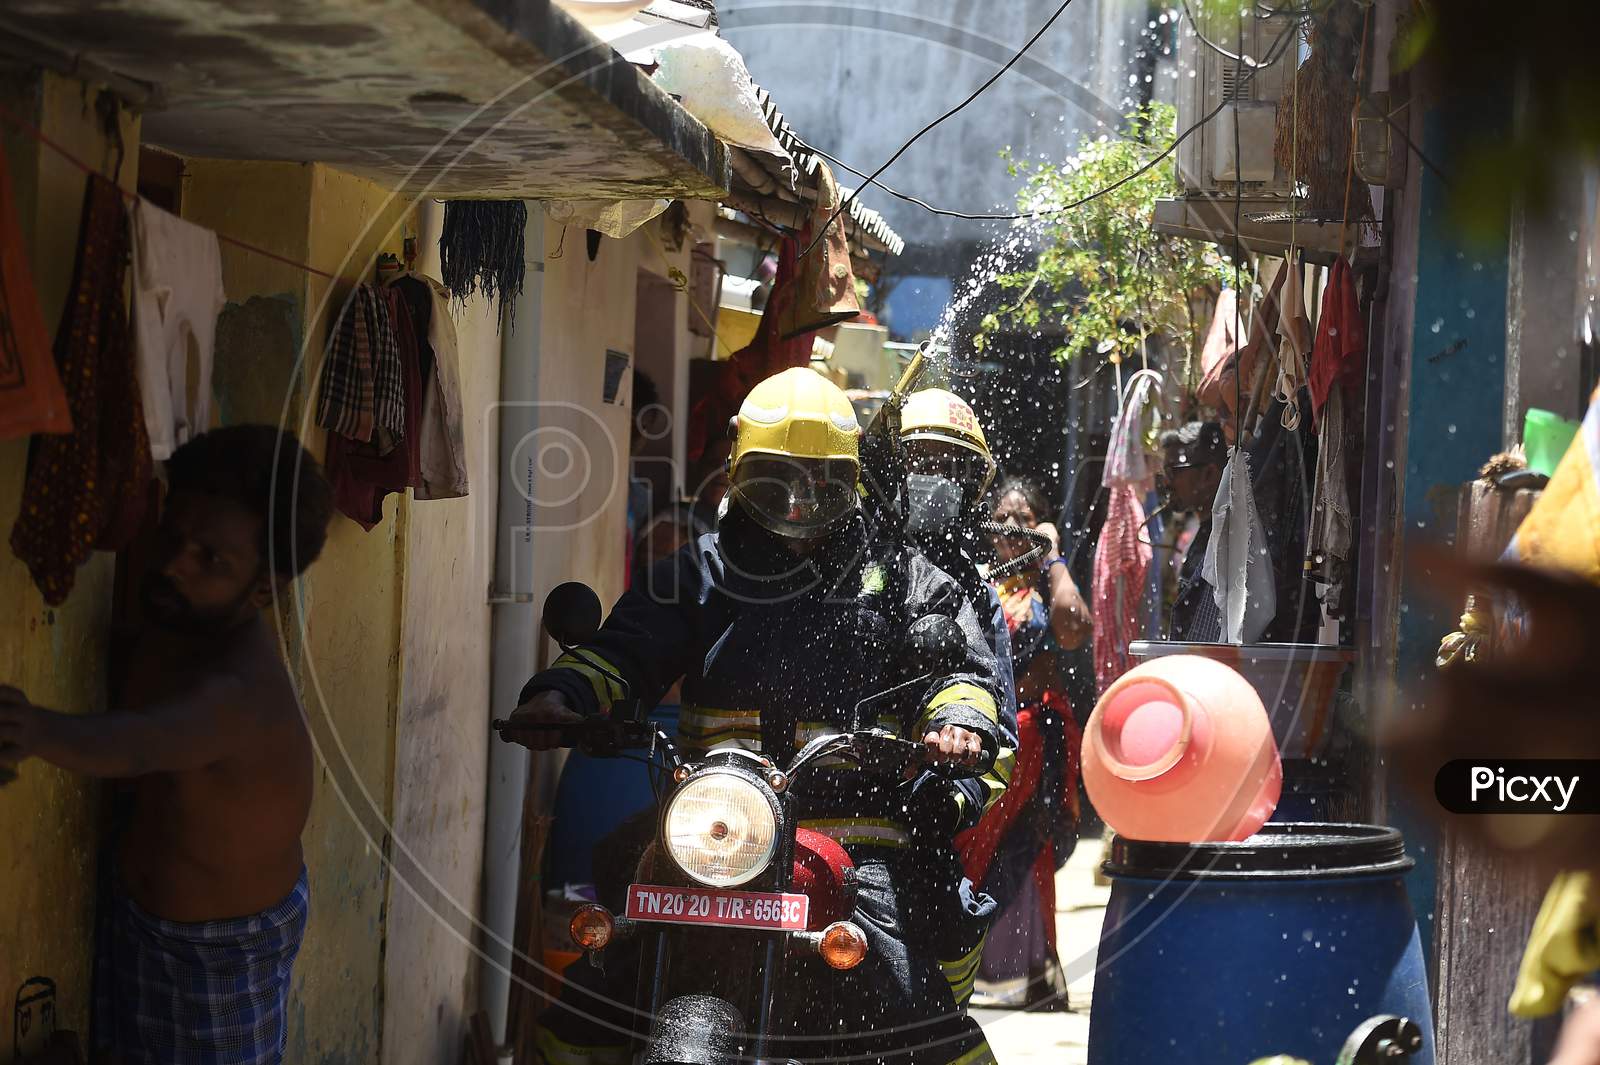 Firefighters on motorbikes spray disinfectants in a containment zone during the lockdown in Chennai on July 04 2020